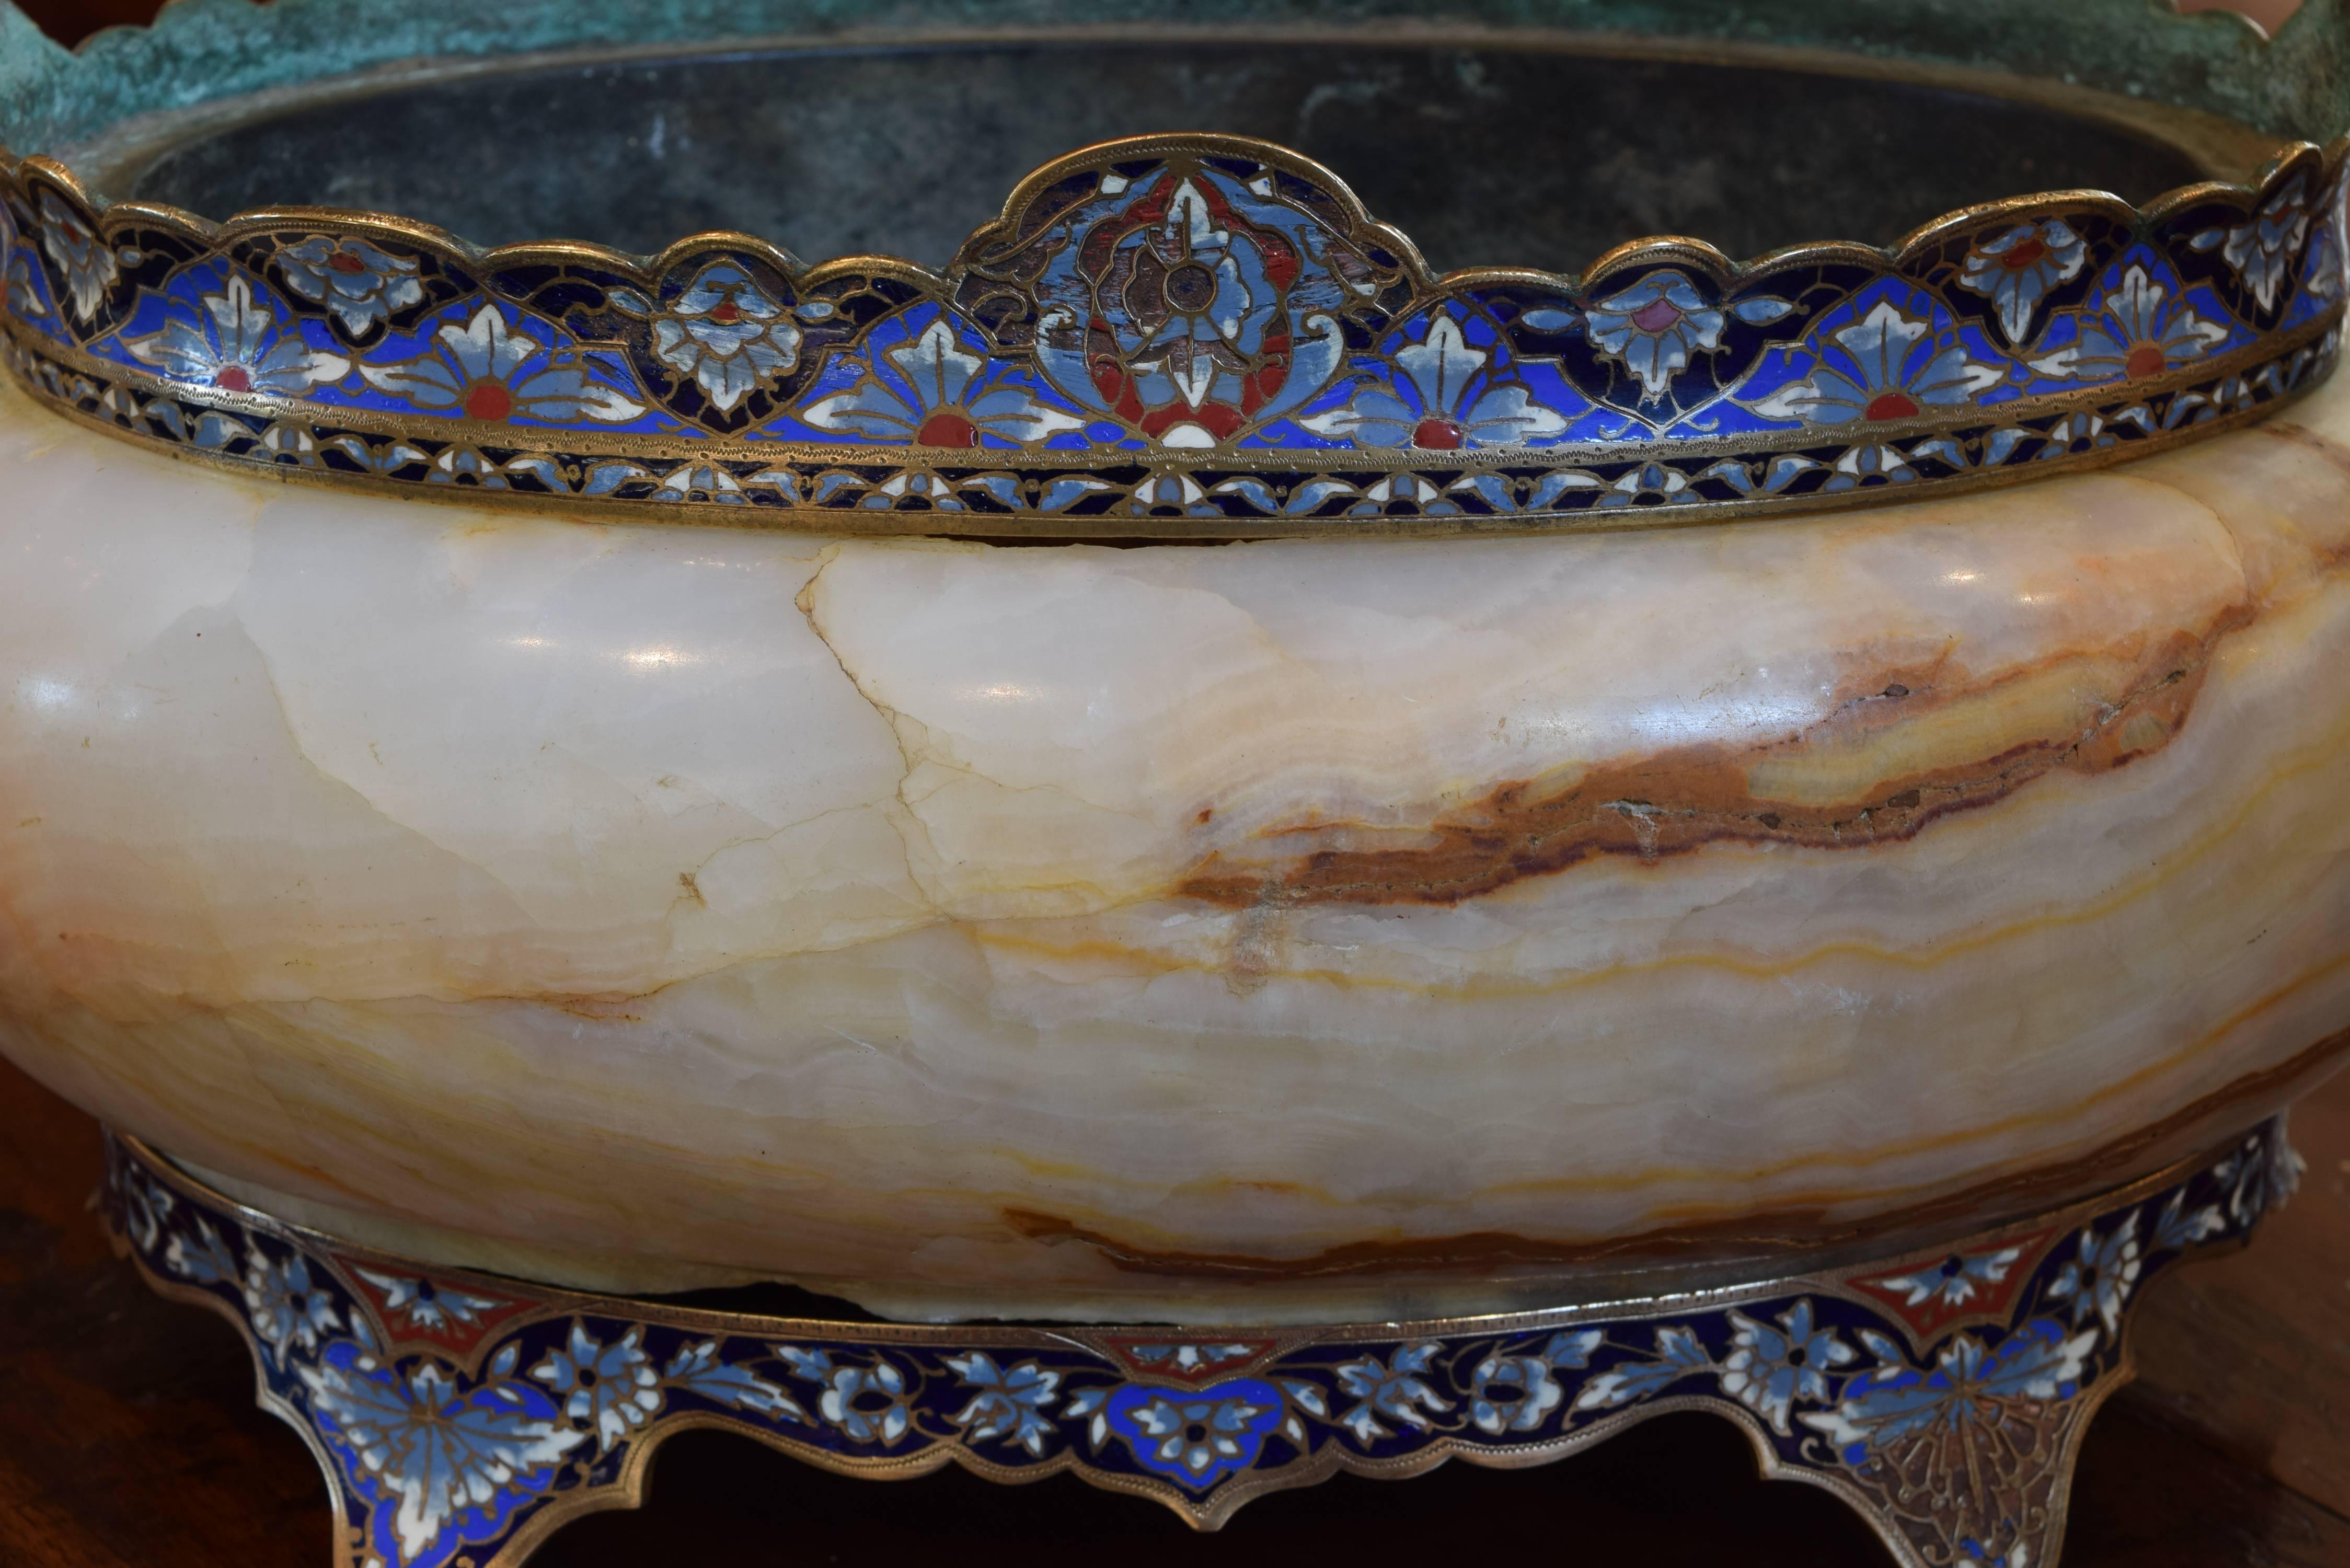 Late 19th Century French Cloisonne on Marble Cachepot from the Second Half of the 19th Century